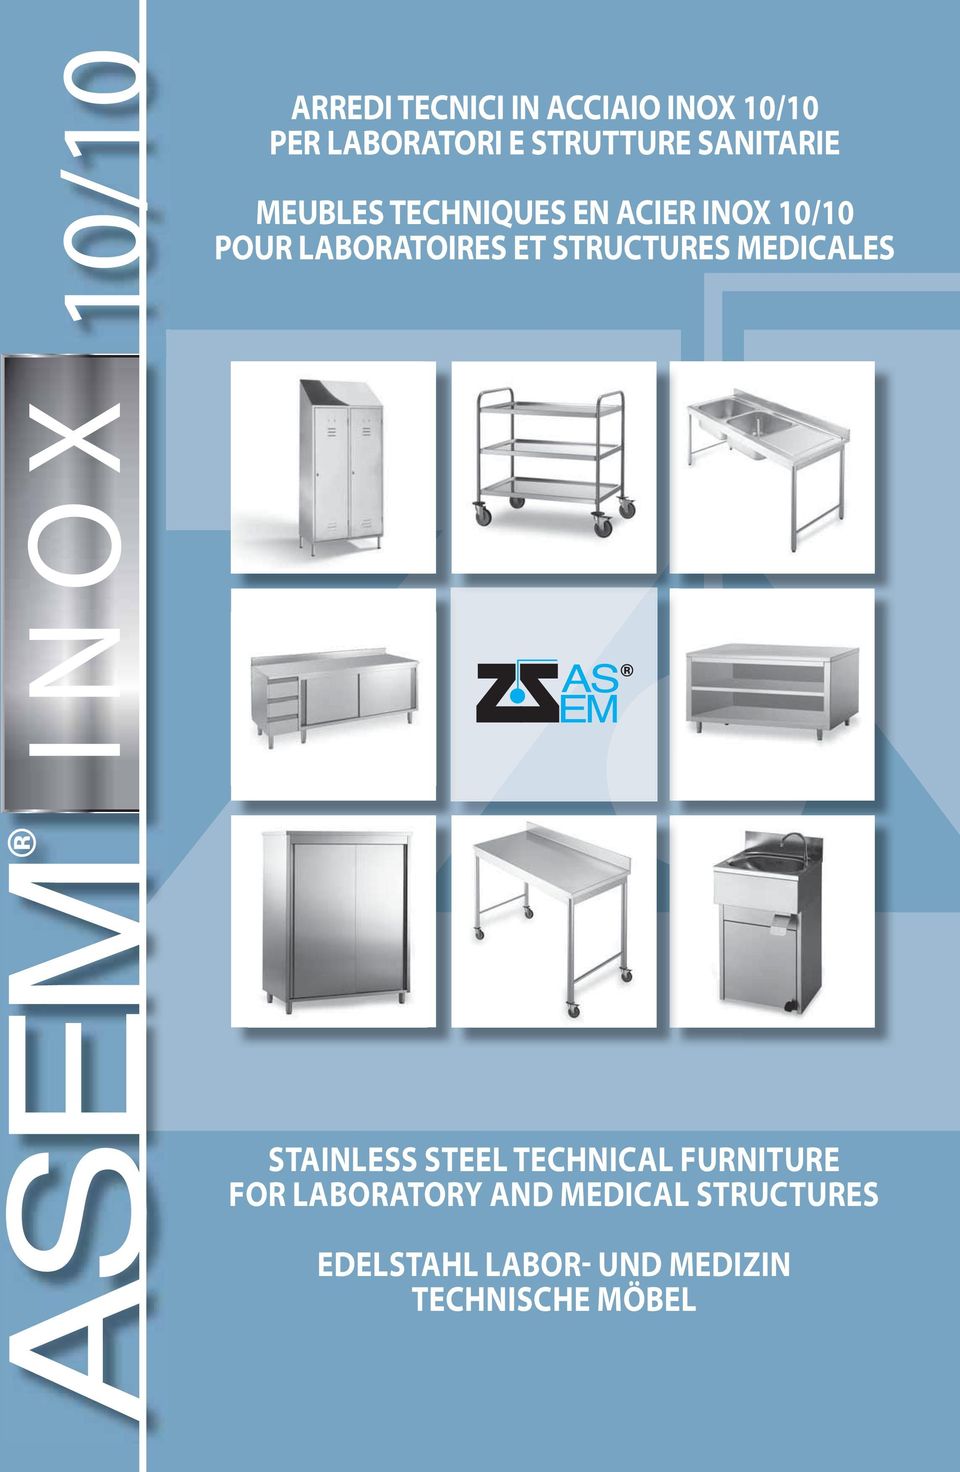 STRUCTURES MEDICALES STAINLESS STEEL TECHNICAL FURNITURE FOR